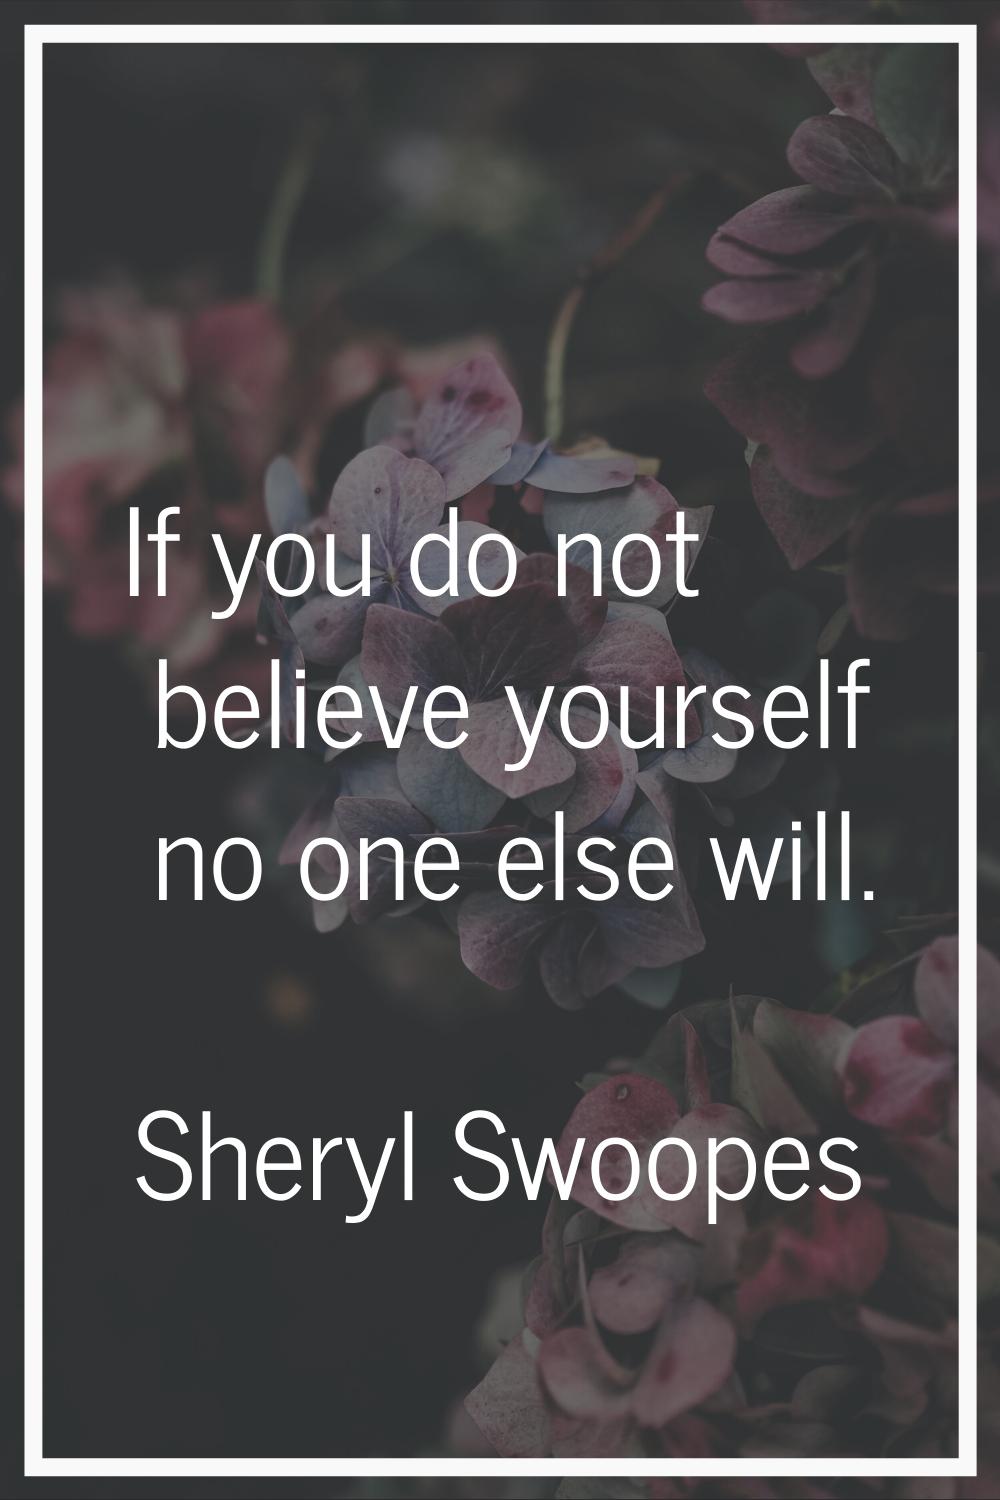 If you do not believe yourself no one else will.